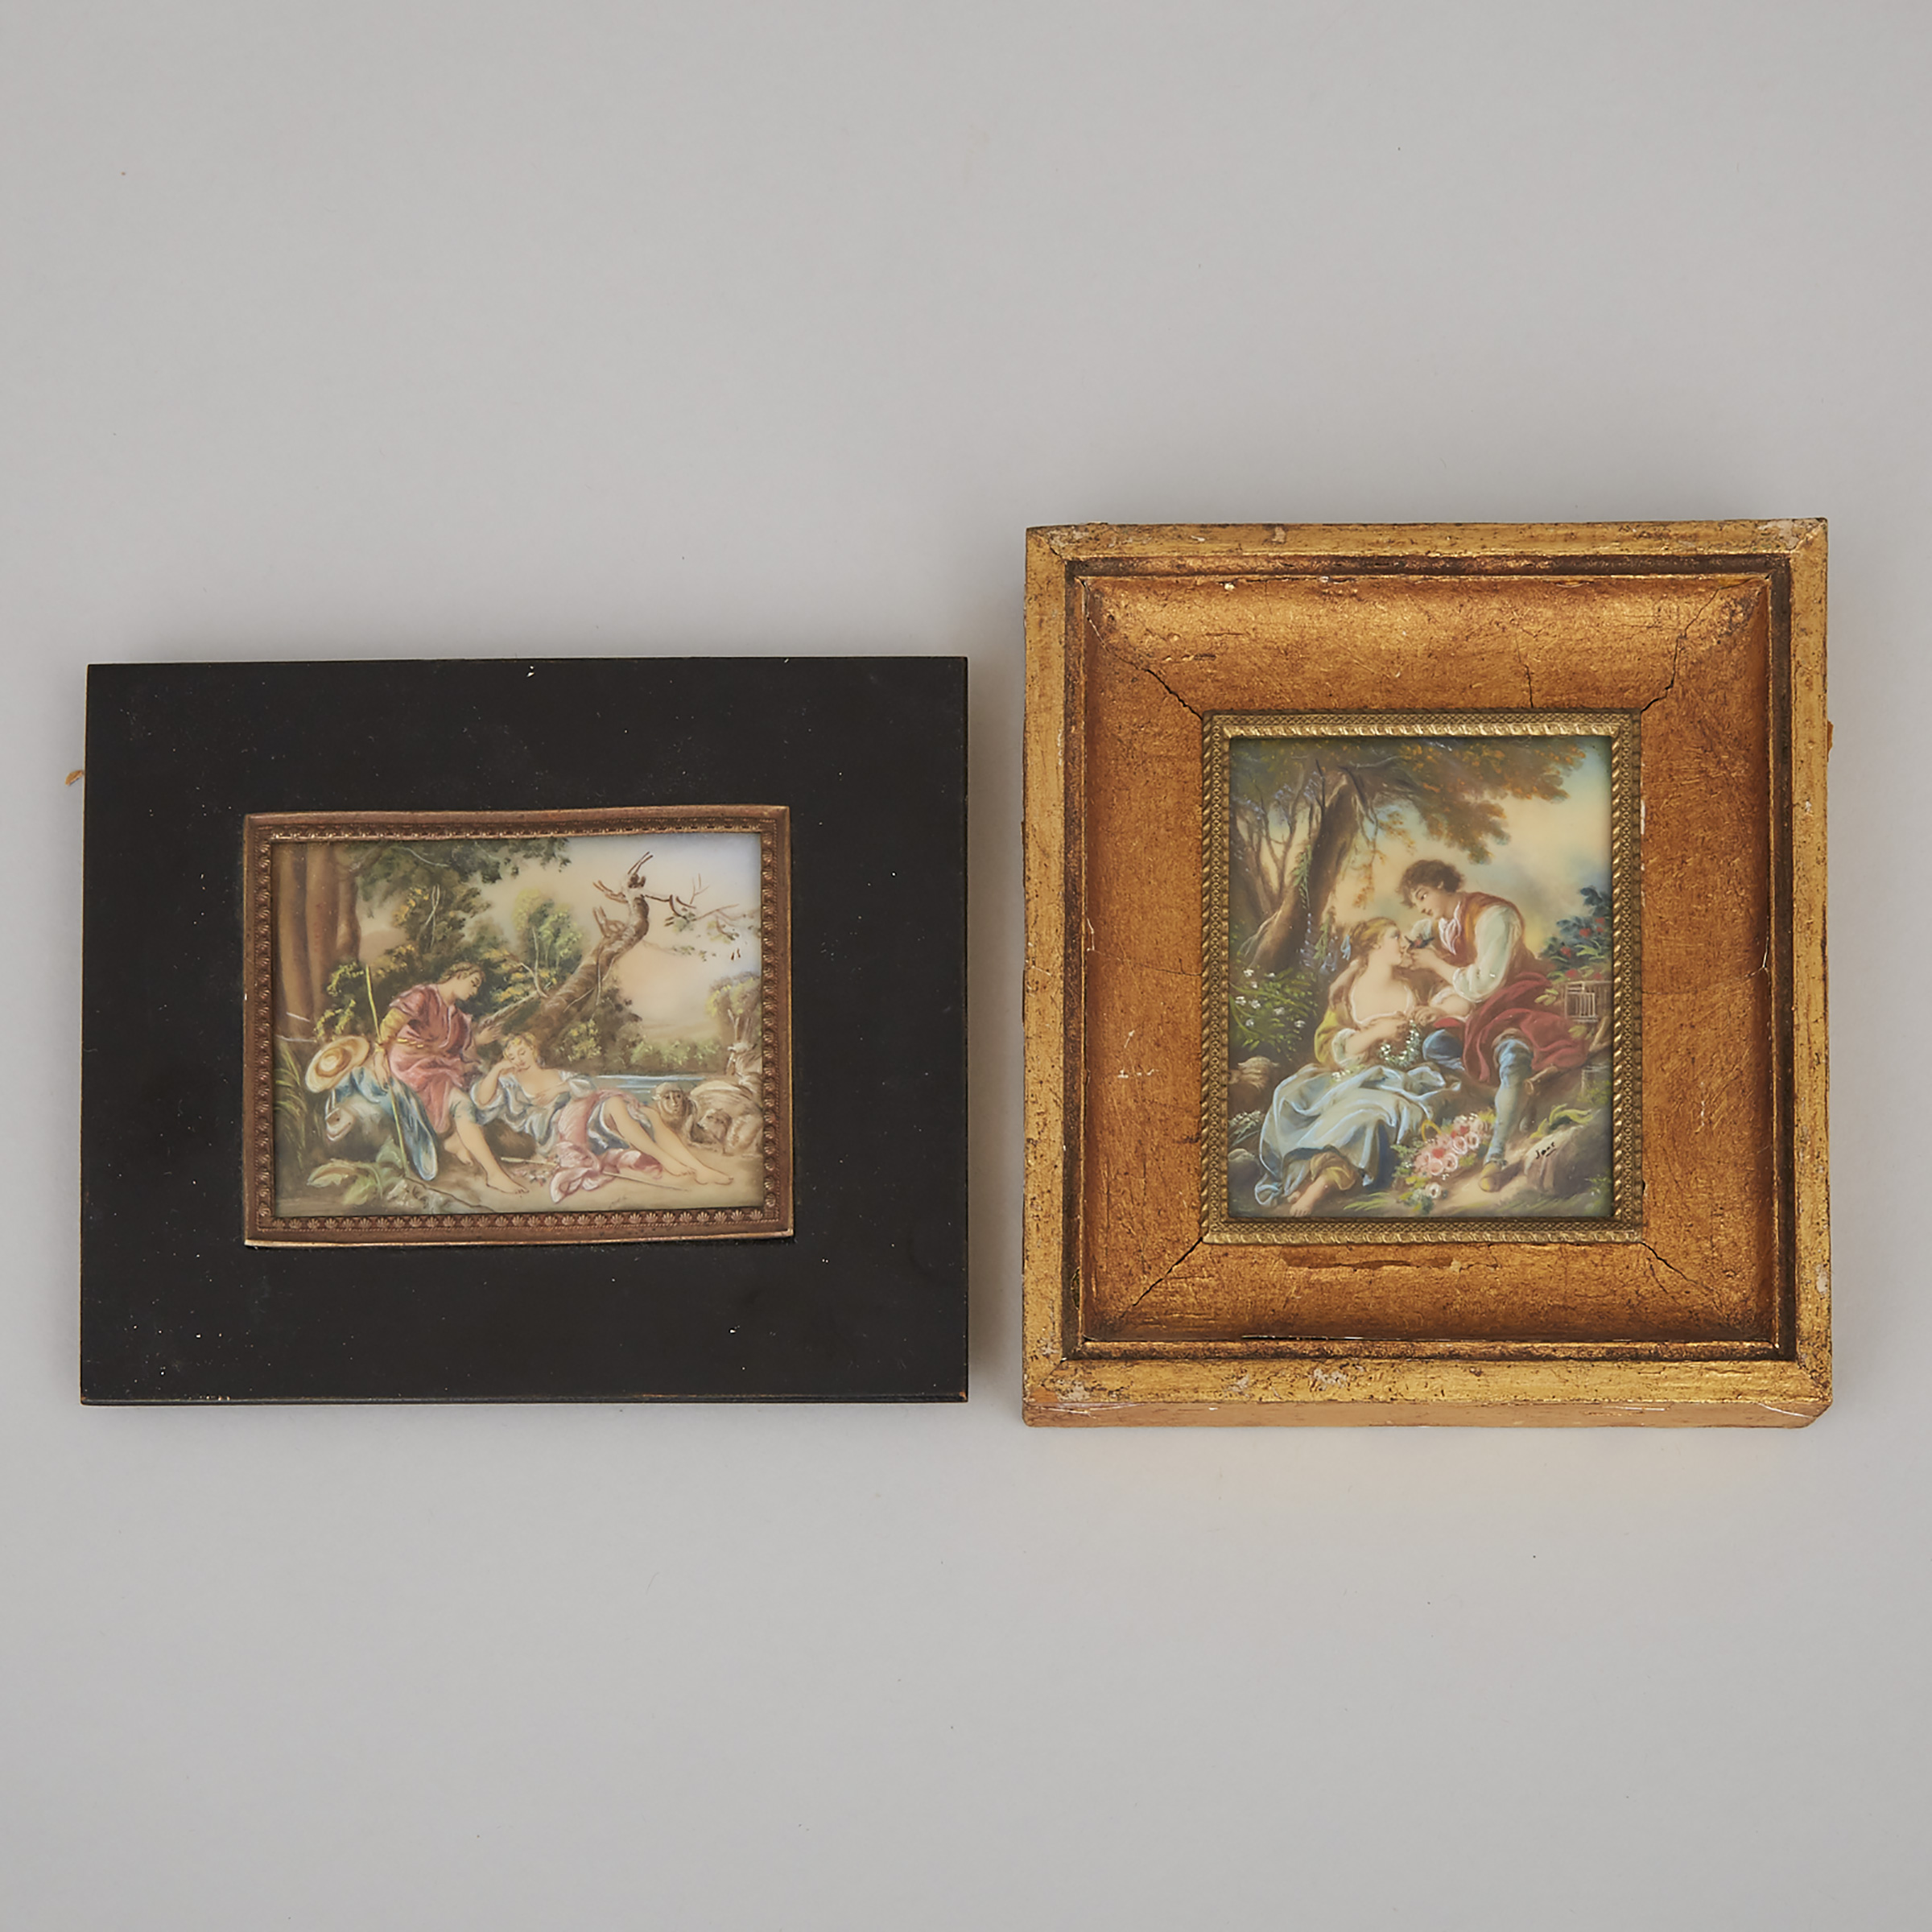 Two Miniatures on Ivory After Francois Boucher (French, 1703-1770)